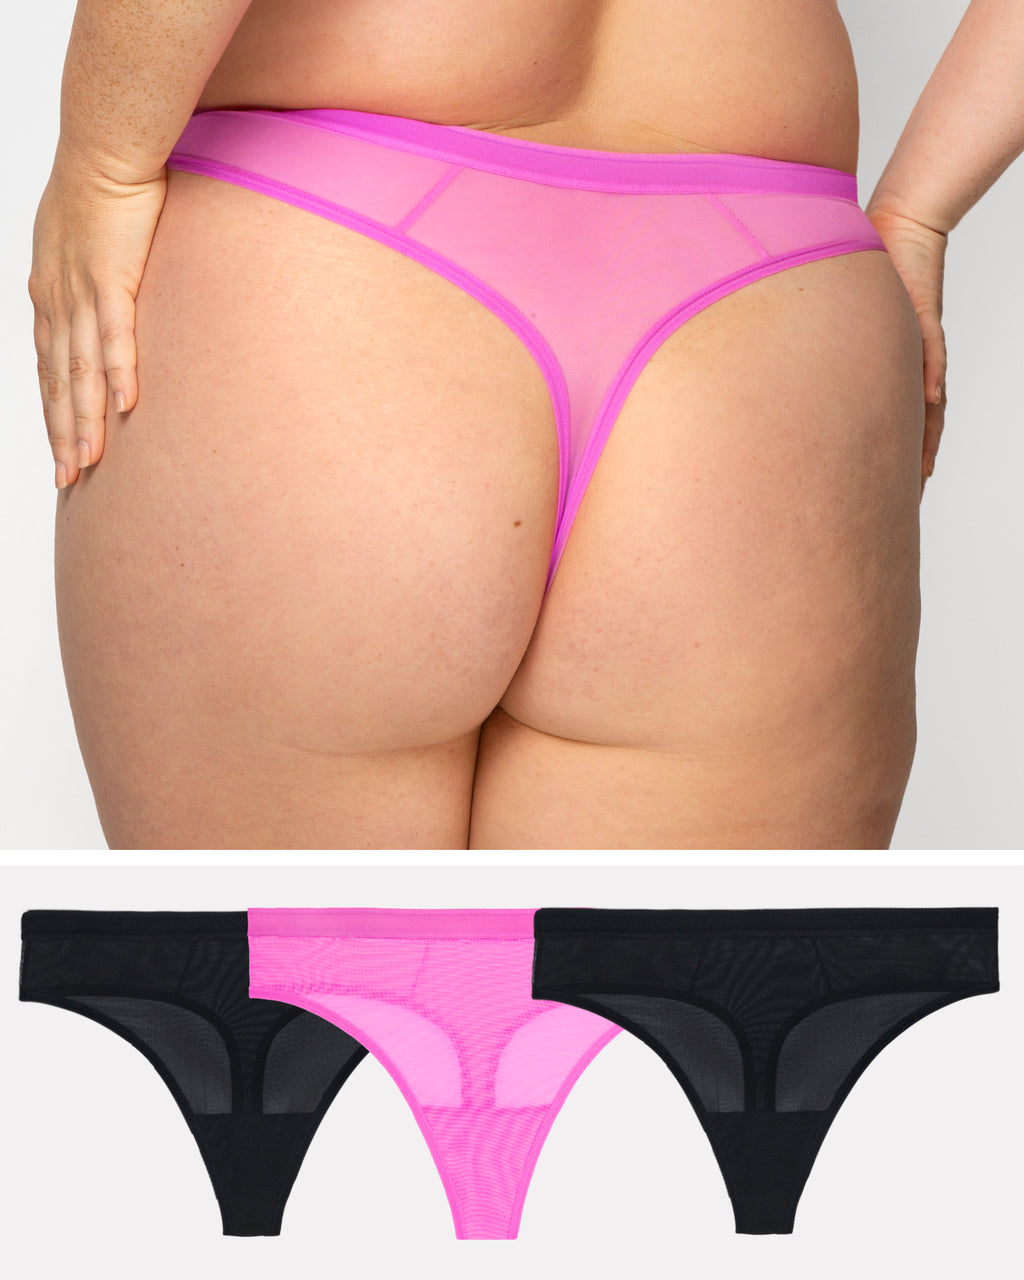 All Over Lace Panty 3 Pack, Neon Pink, Small/Medium